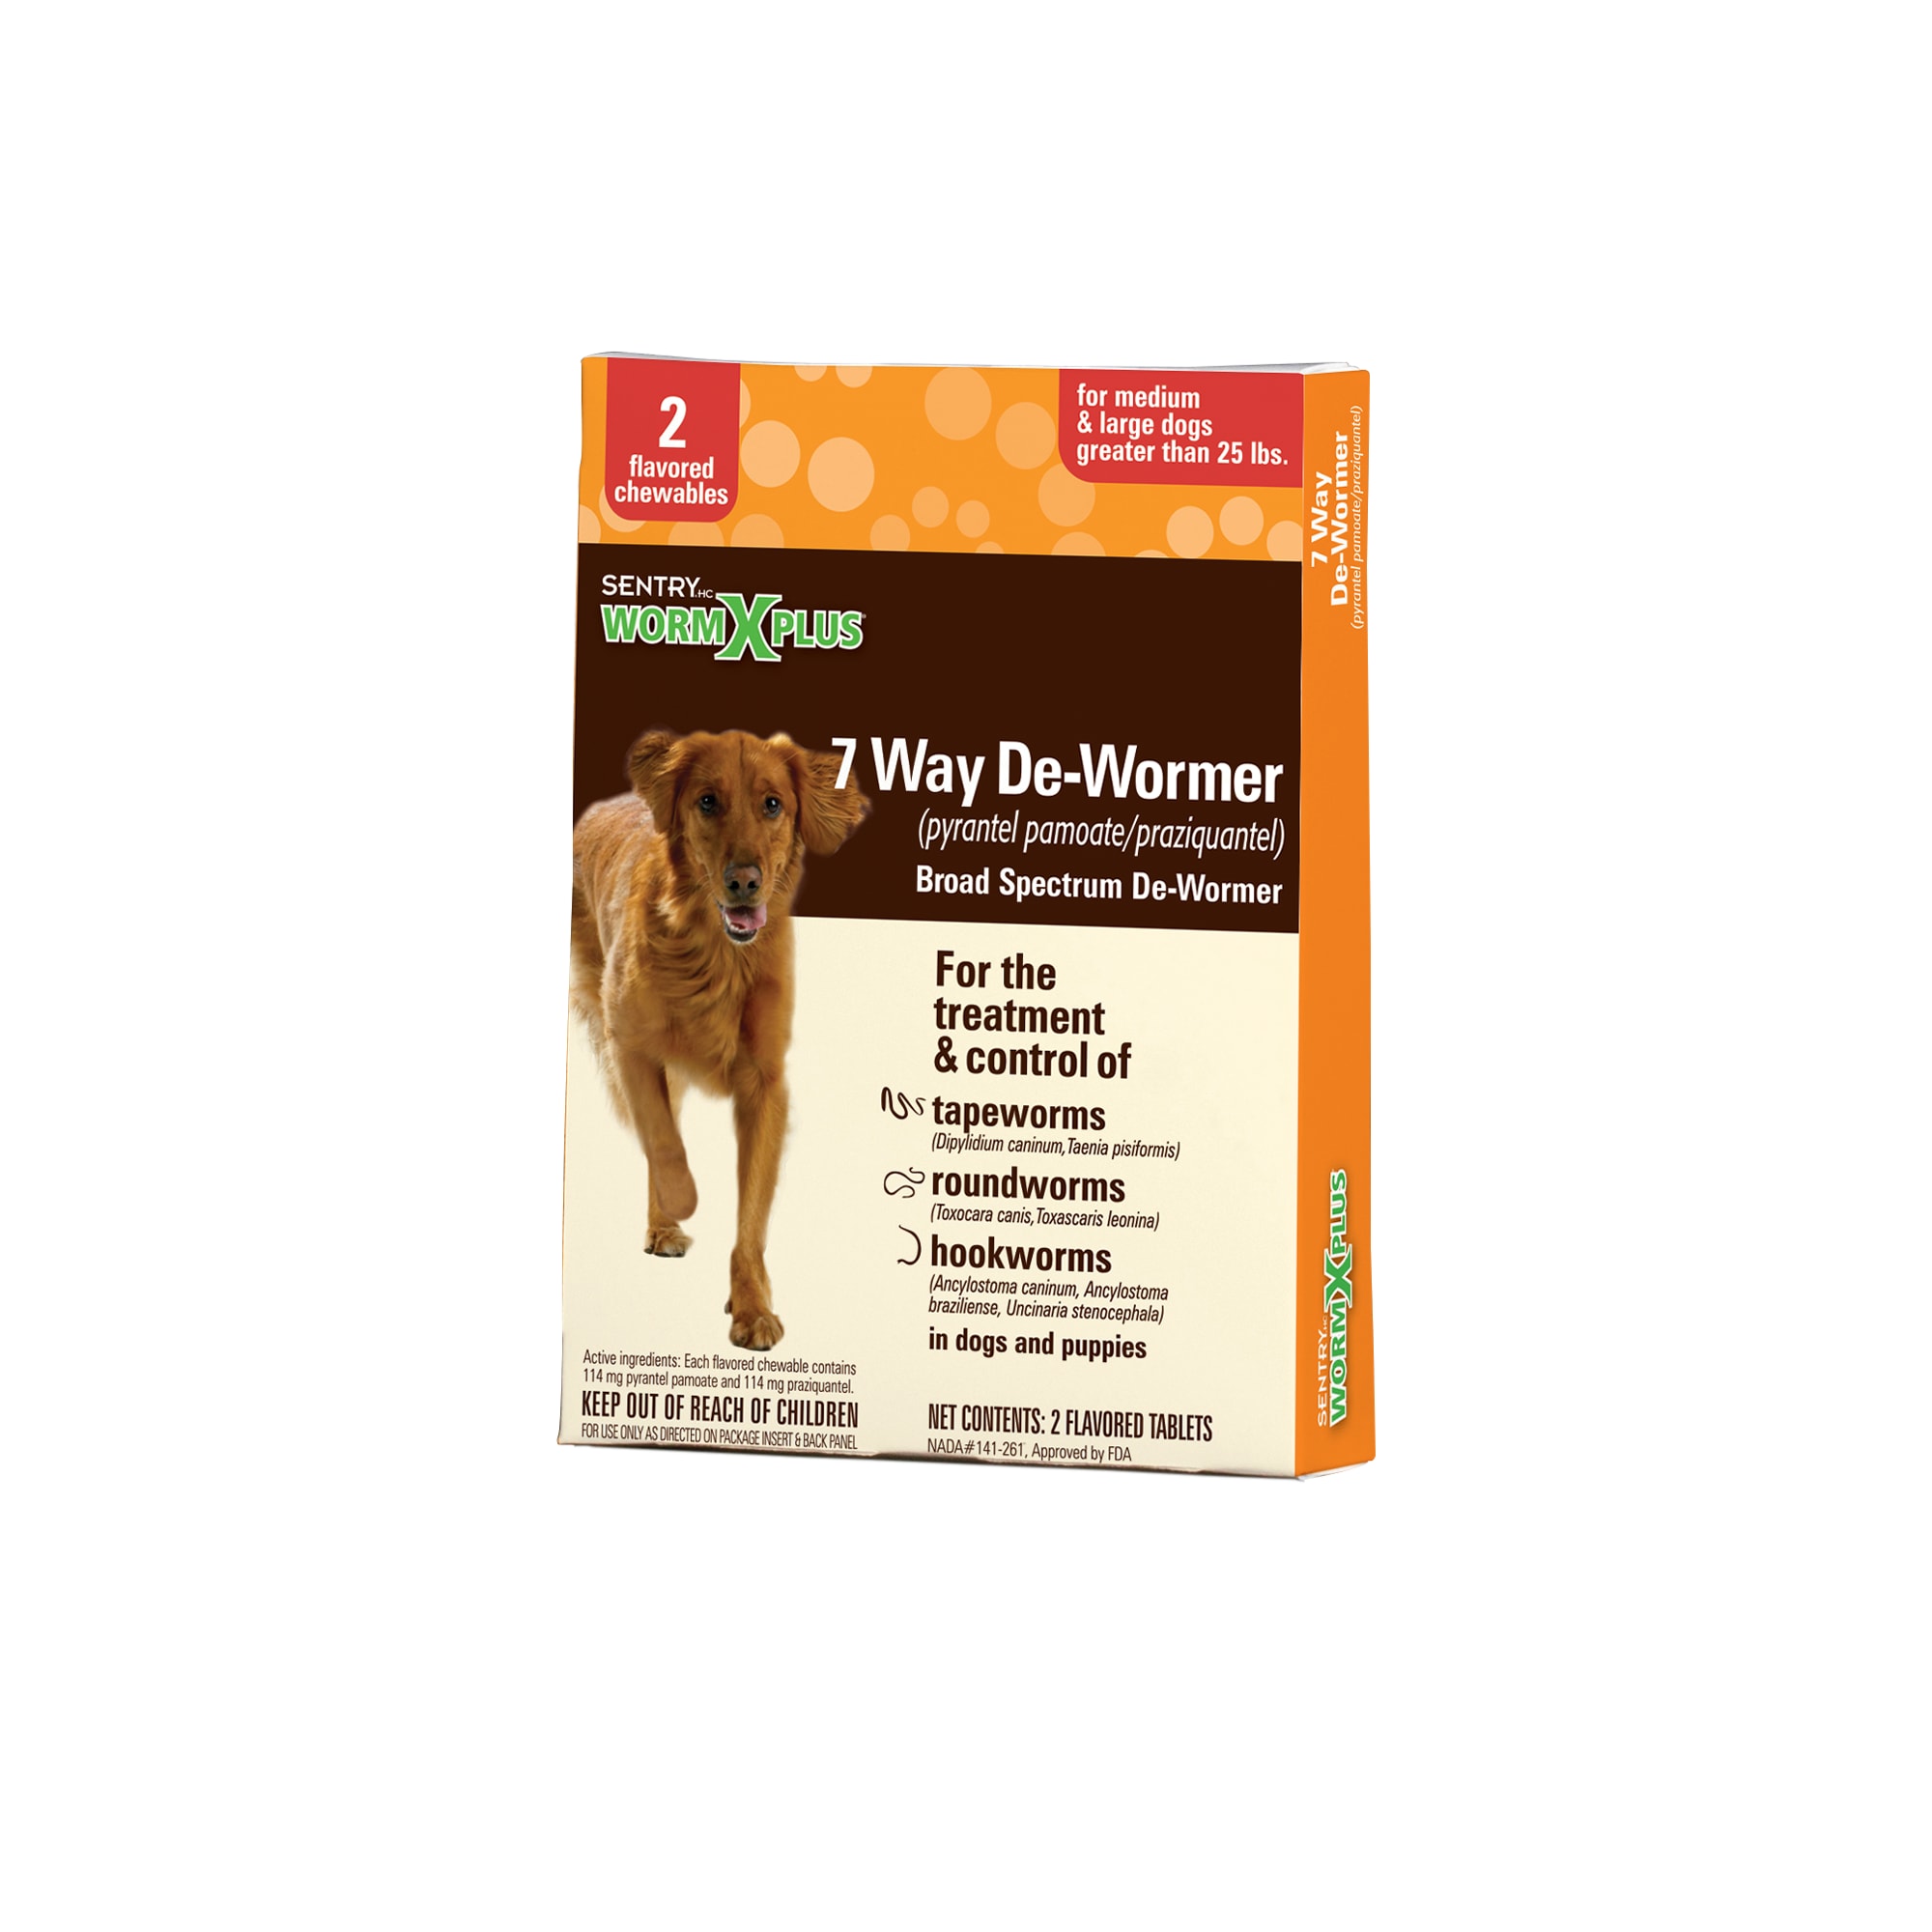 Sentry HC WormX Plus Flavored De-Wormer Chewables for Dogs, 2CT, 2 CT